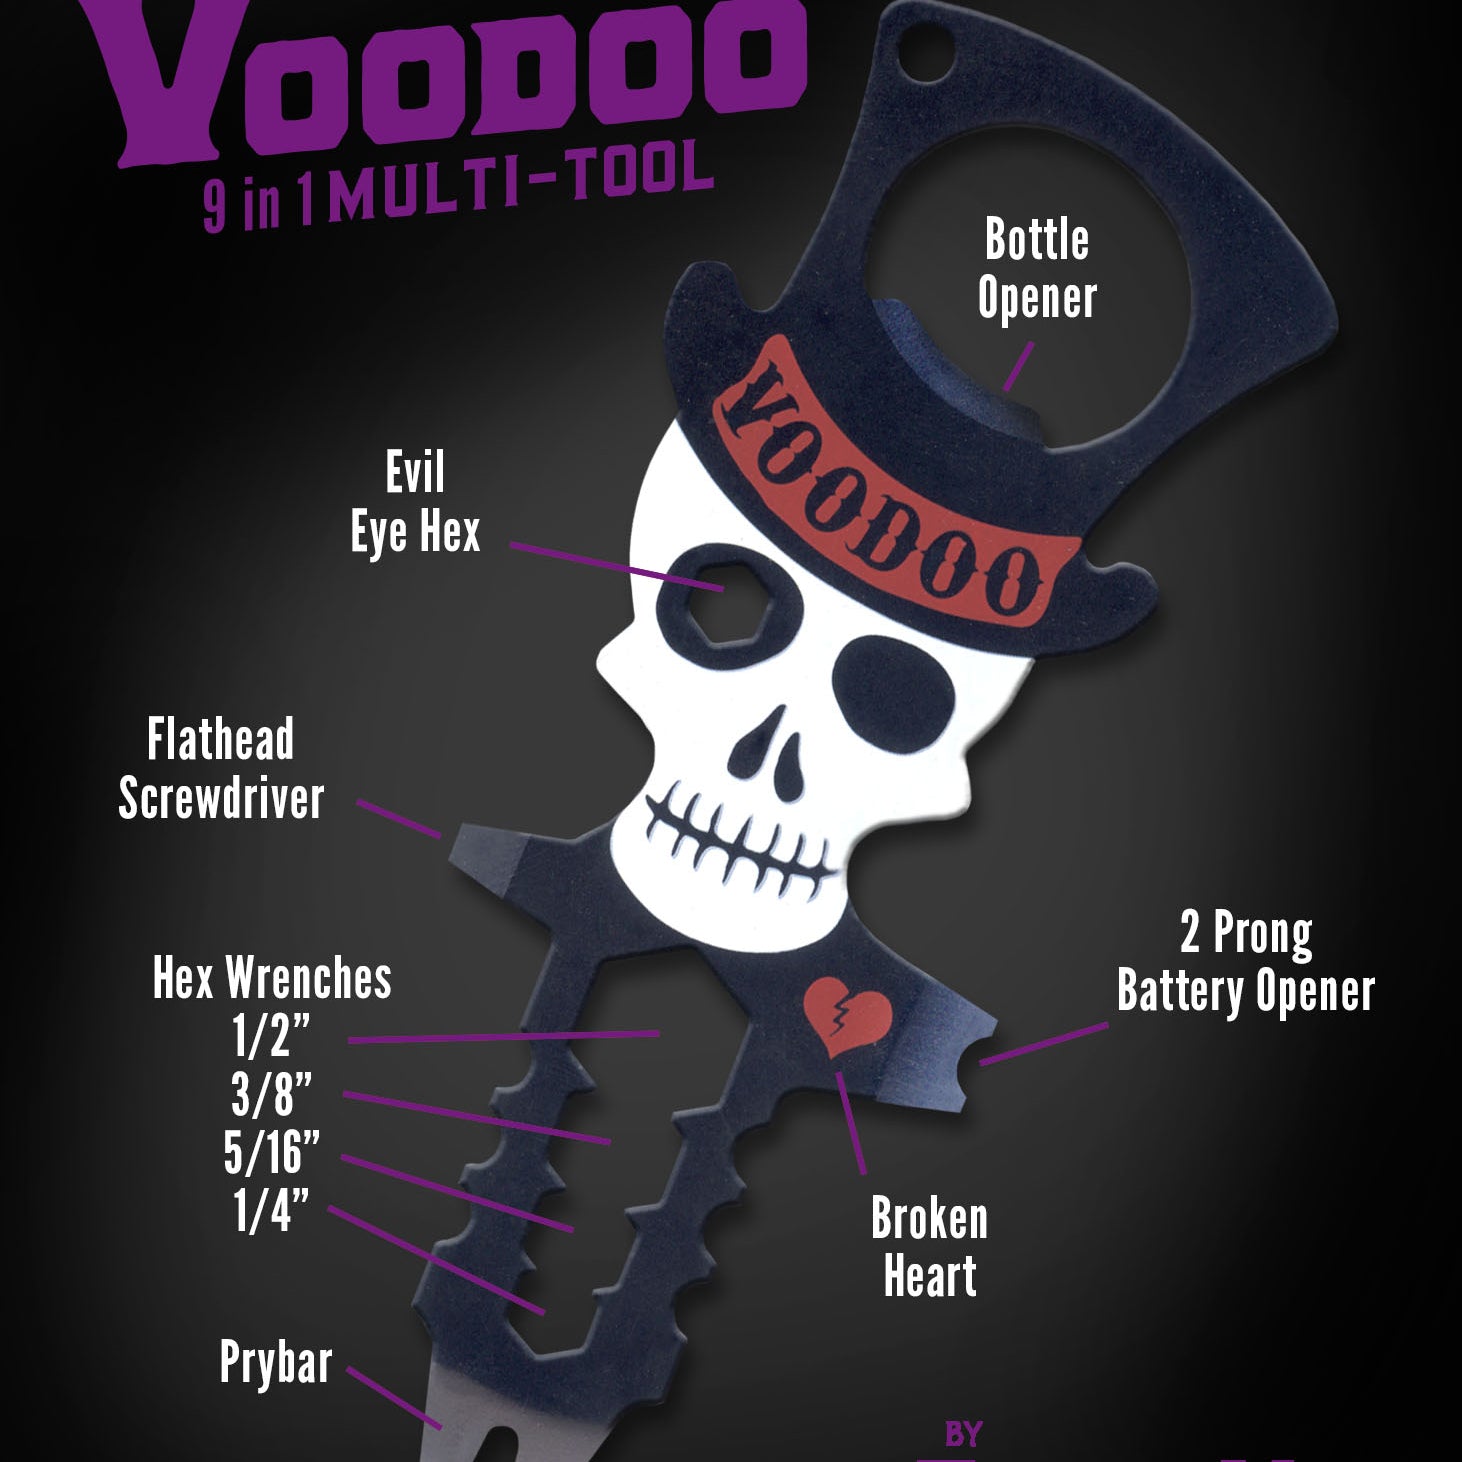 The Voodoo Doll Multifunction Pocket Tool Portable and pocket sized preparedness. Great as everyday carry for DIY projects, camping, backpacking, glamping or hiking! 